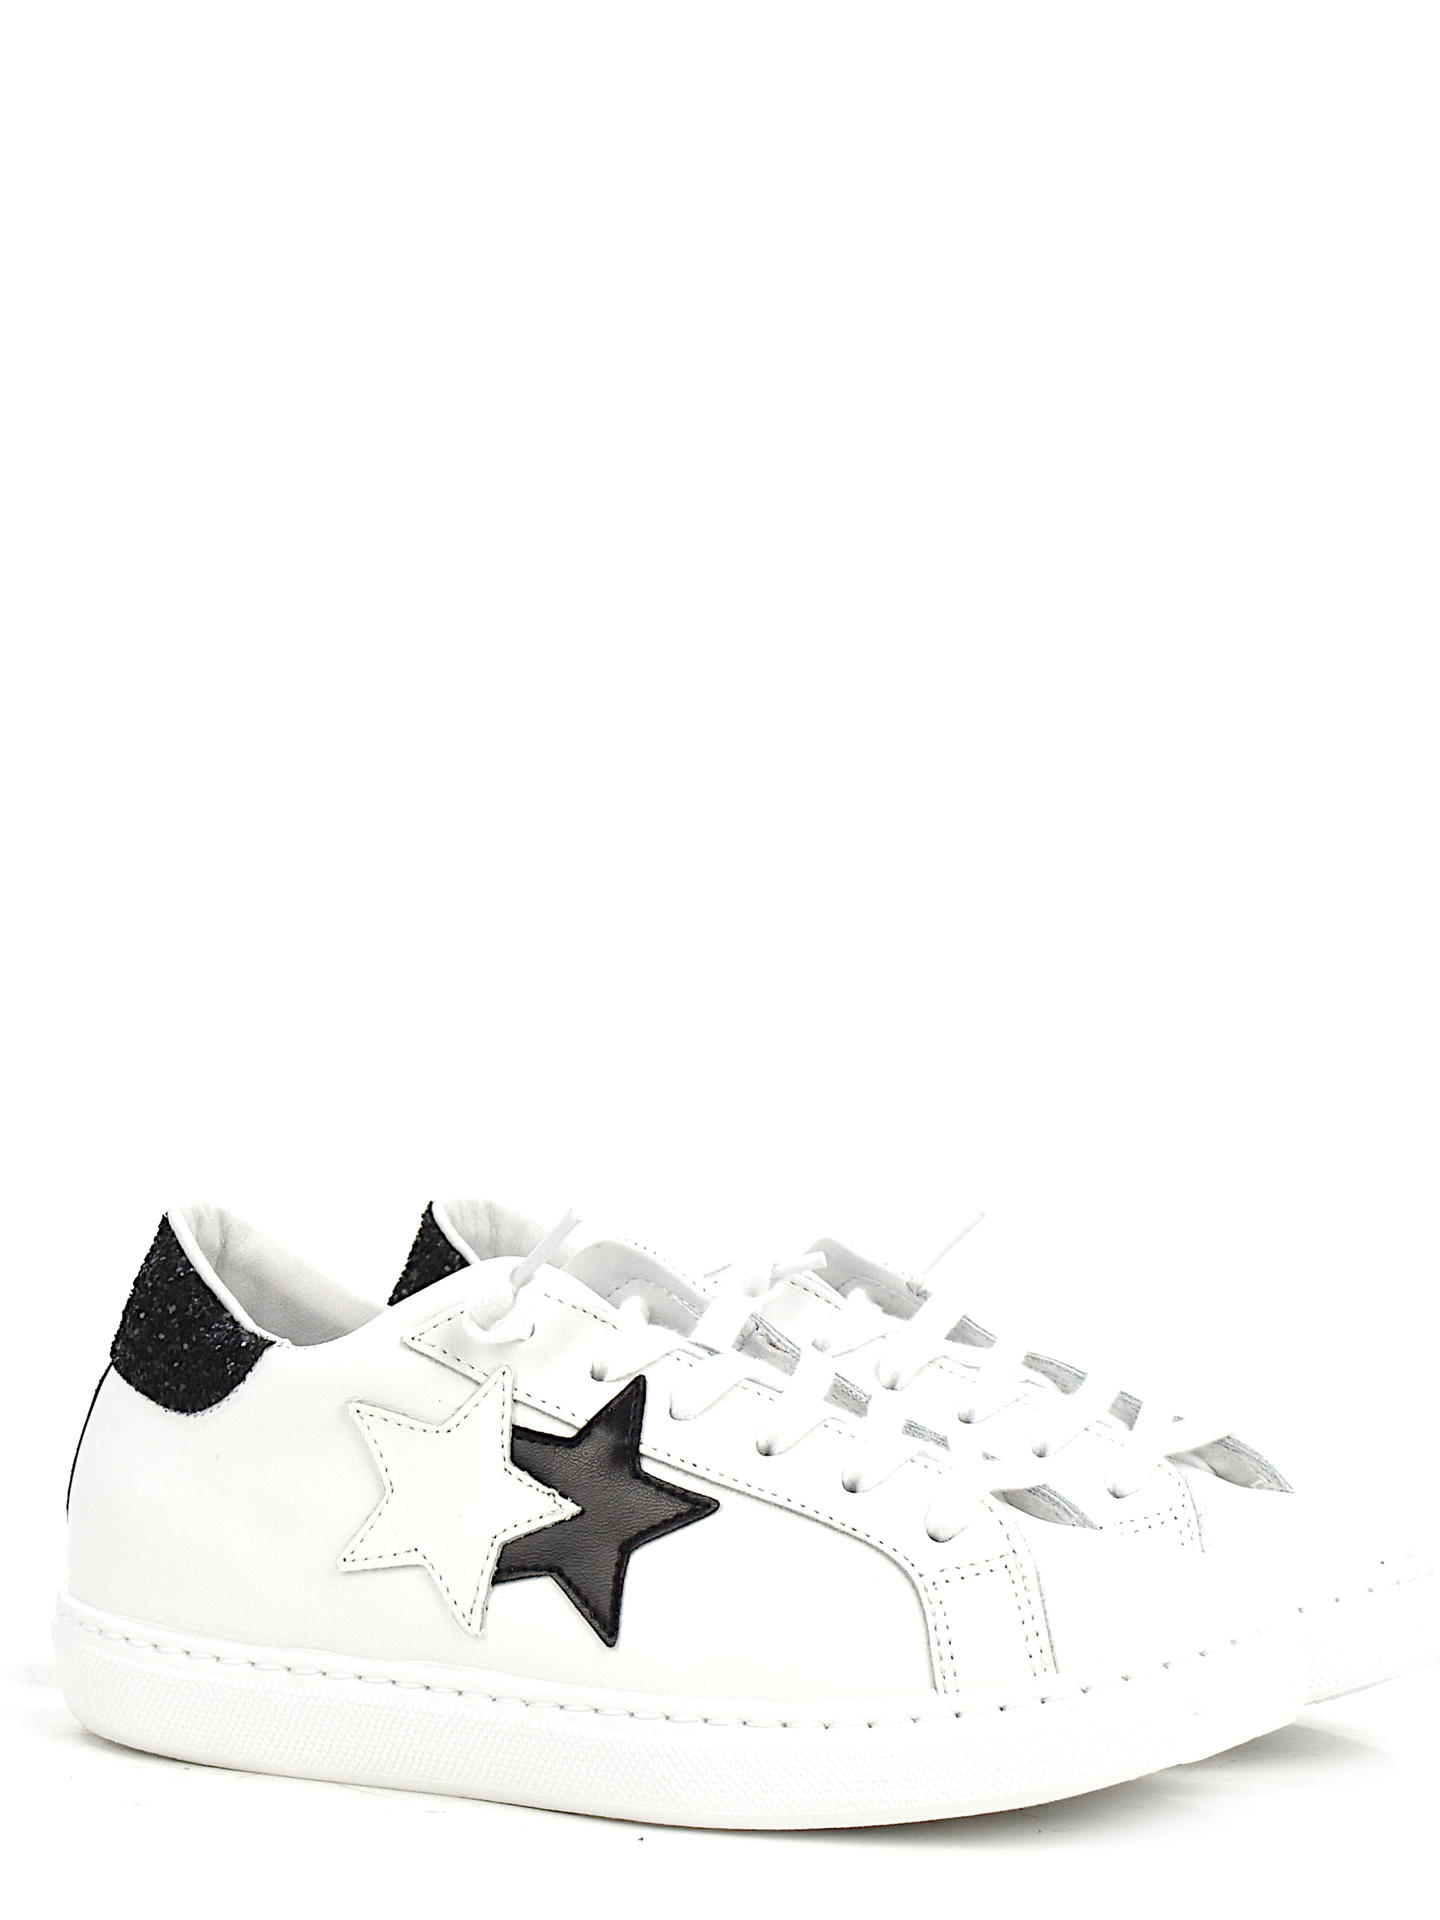 SNEAKERS 2STAR 3212 BIANCO/ARGENTO